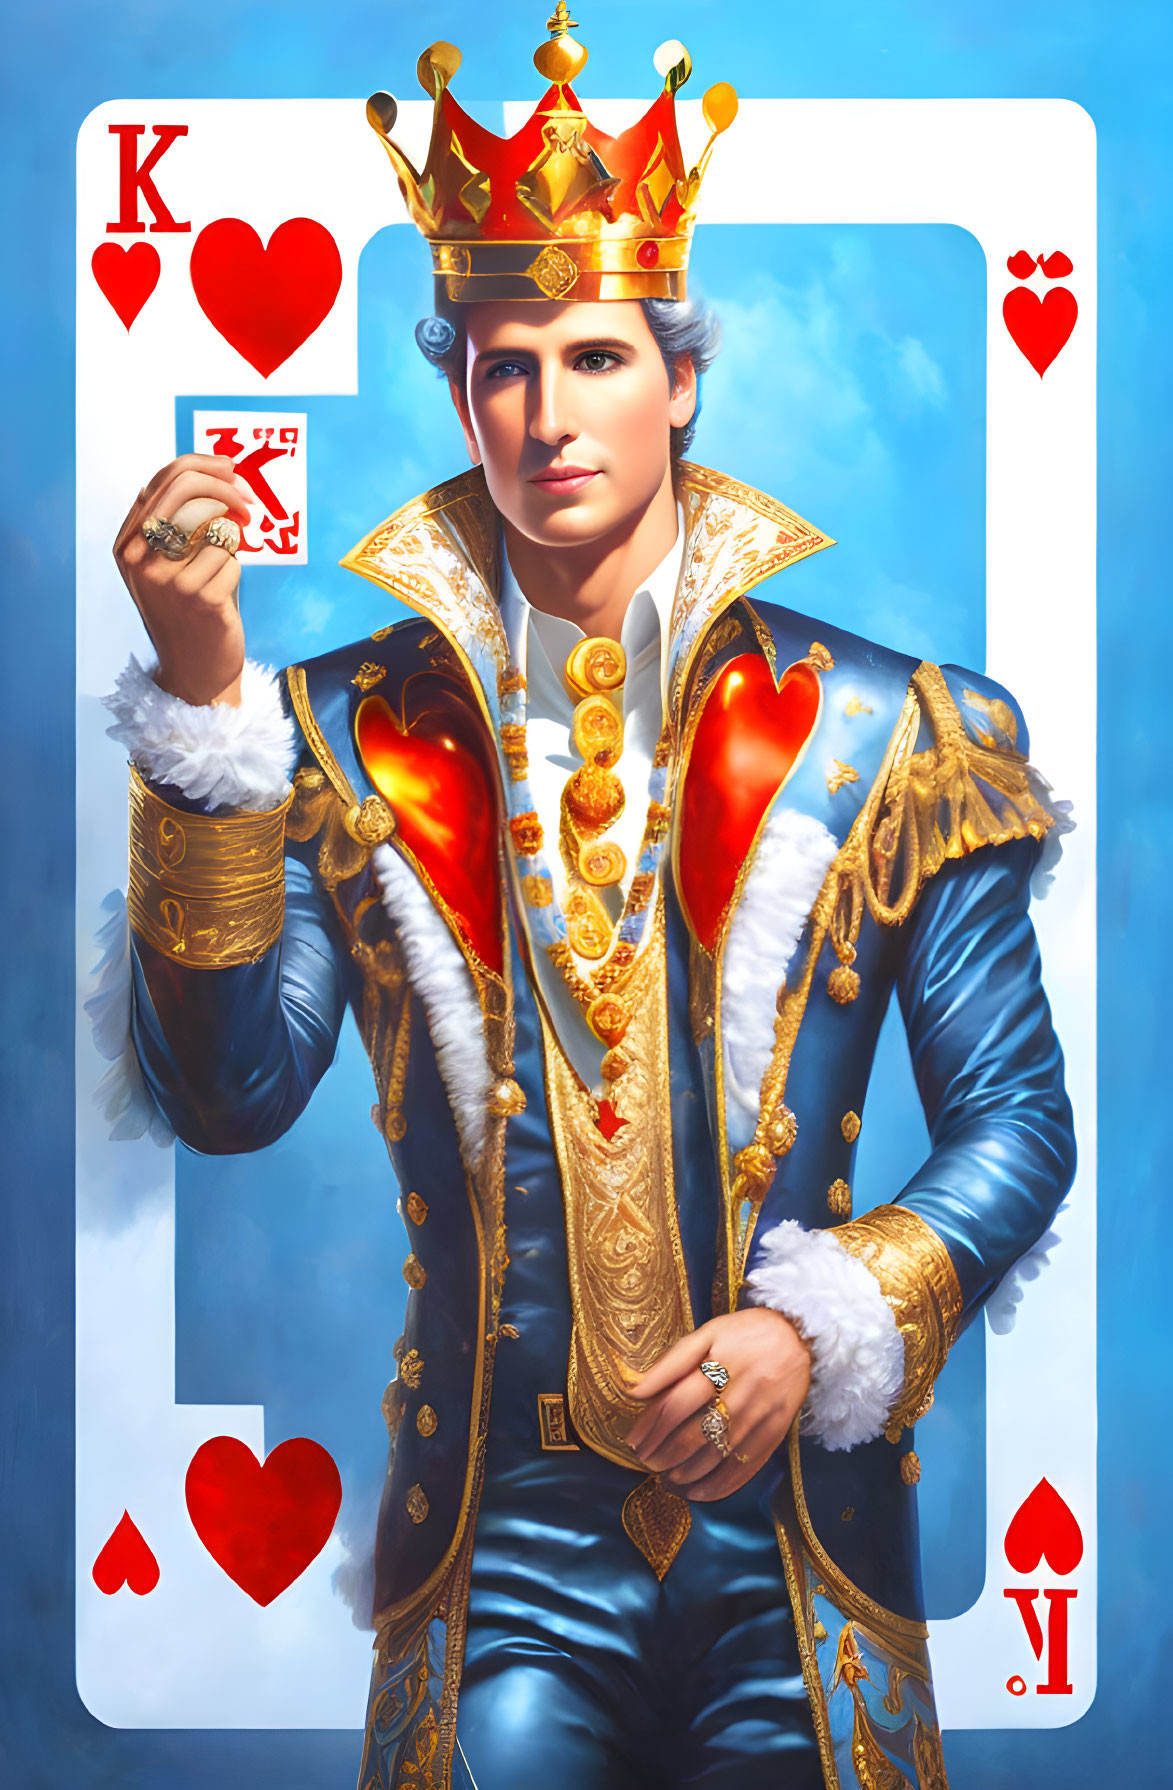 The King of Hearts ... K<3